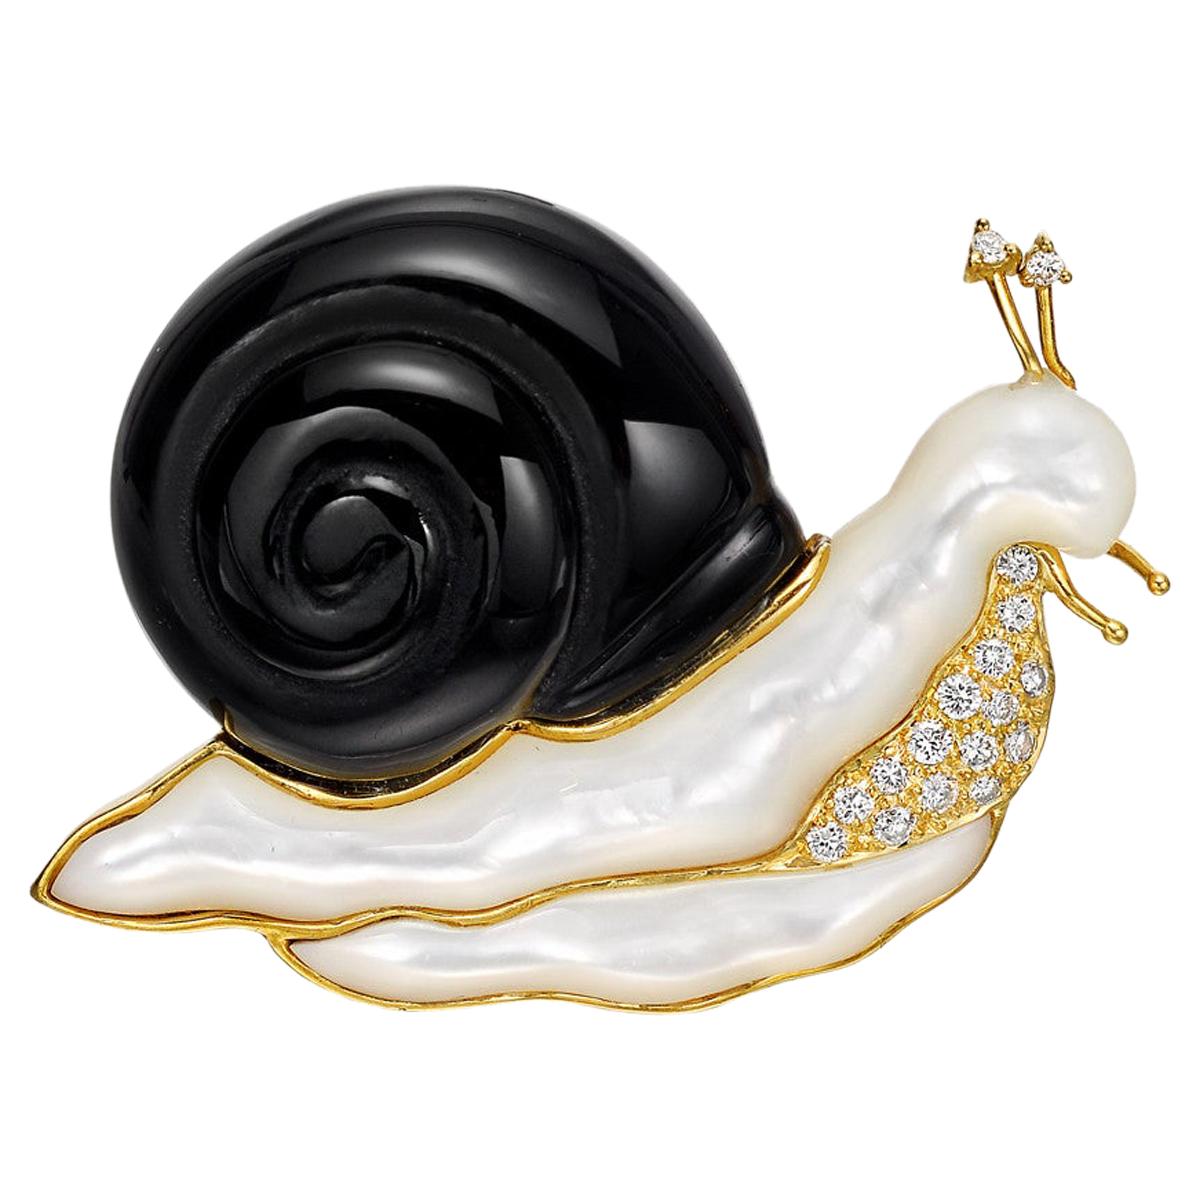 Black Onyx, Mother of Pearl and Diamond Snail Pin